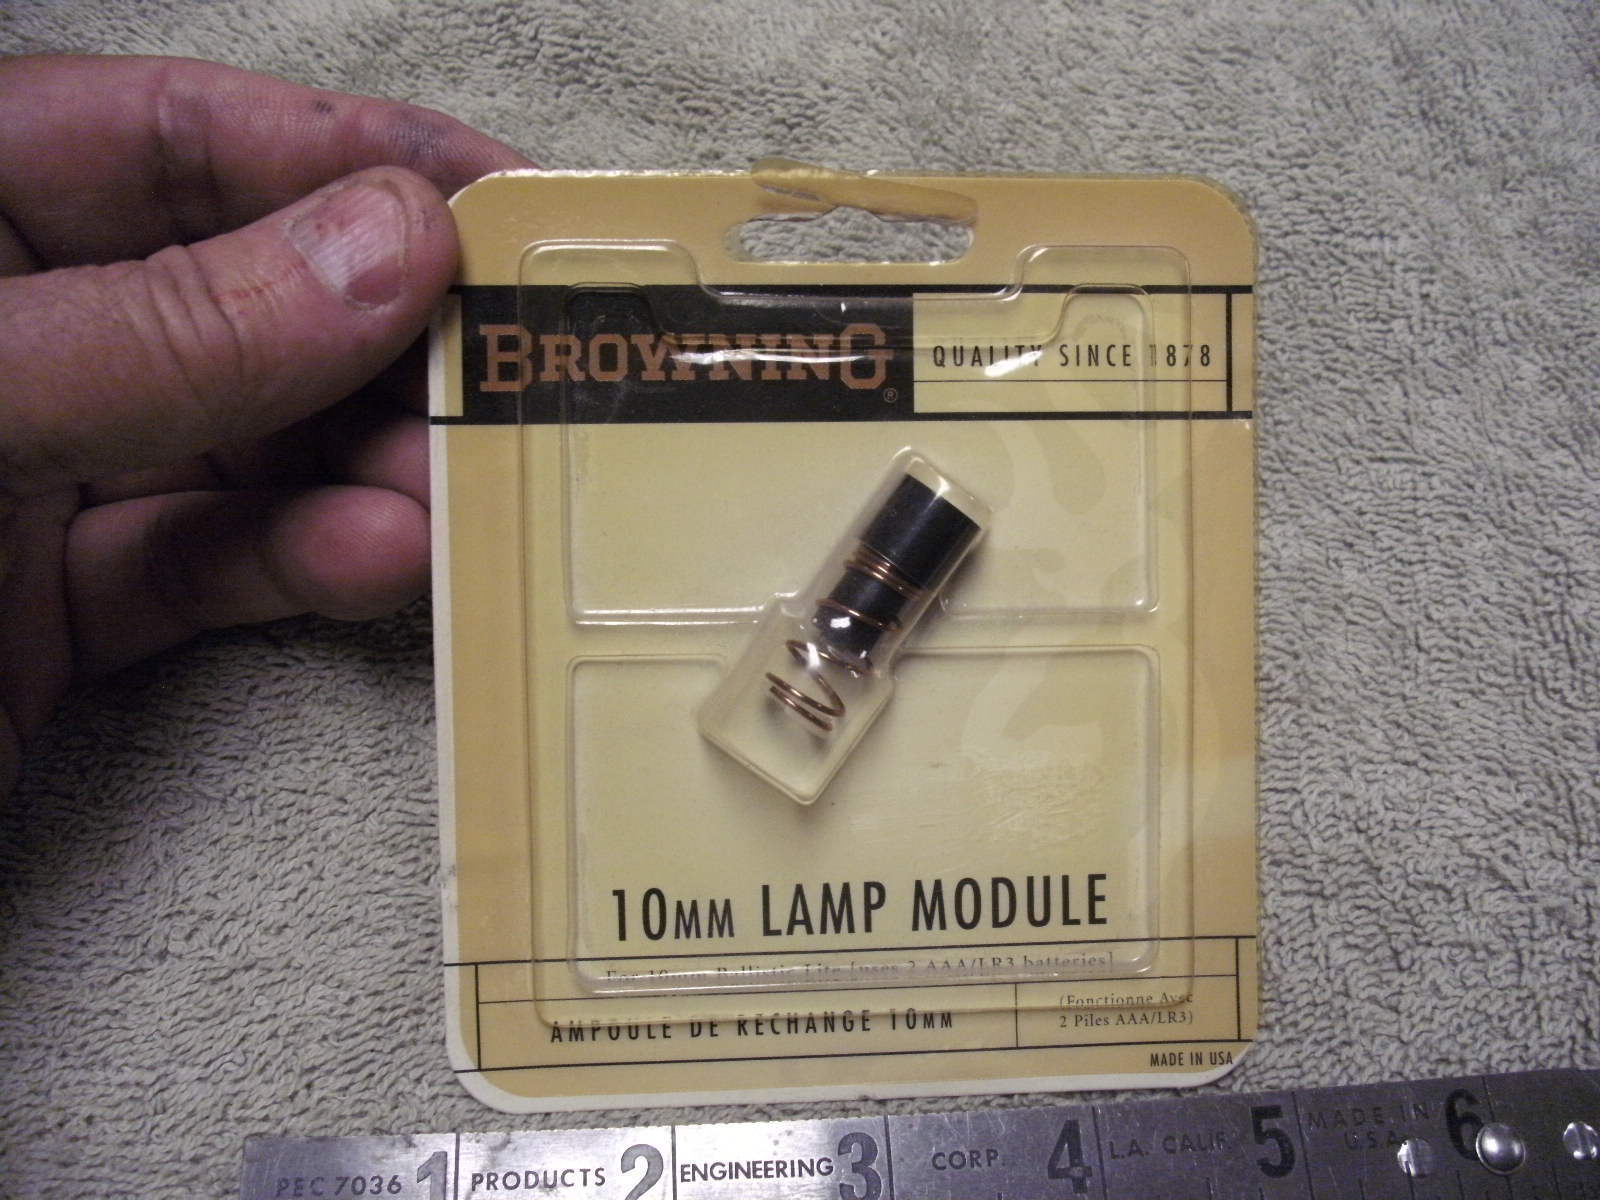 Colorado Springs Mall Sacramento Mall Browning Replacement Lamp Module 10mm for Ballistic